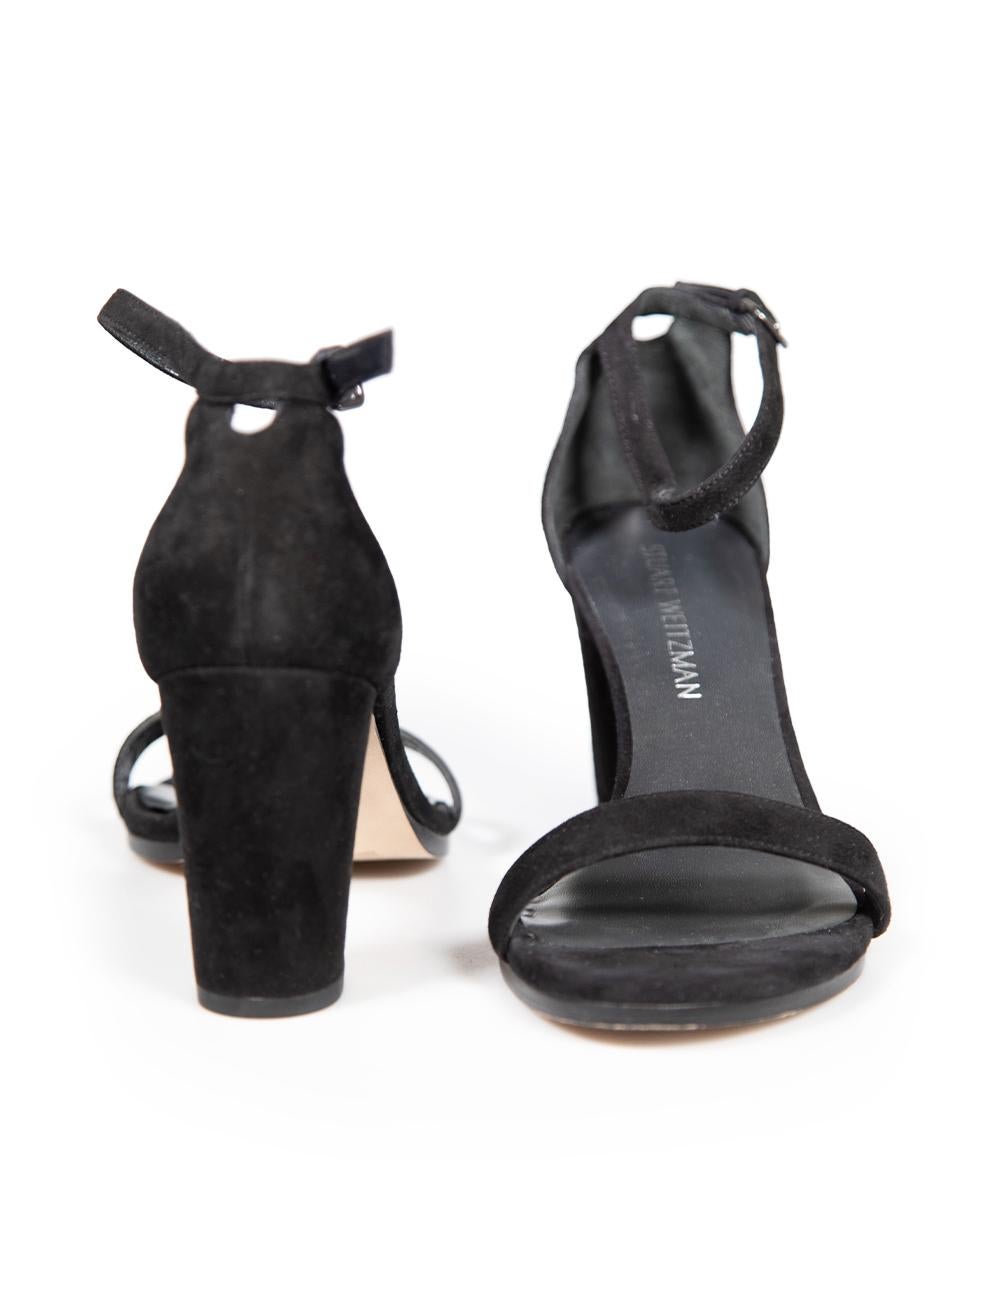 Stuart Weitzman Black Suede Strap Mid Heel Sandals Size IT 39.5 In Excellent Condition For Sale In London, GB